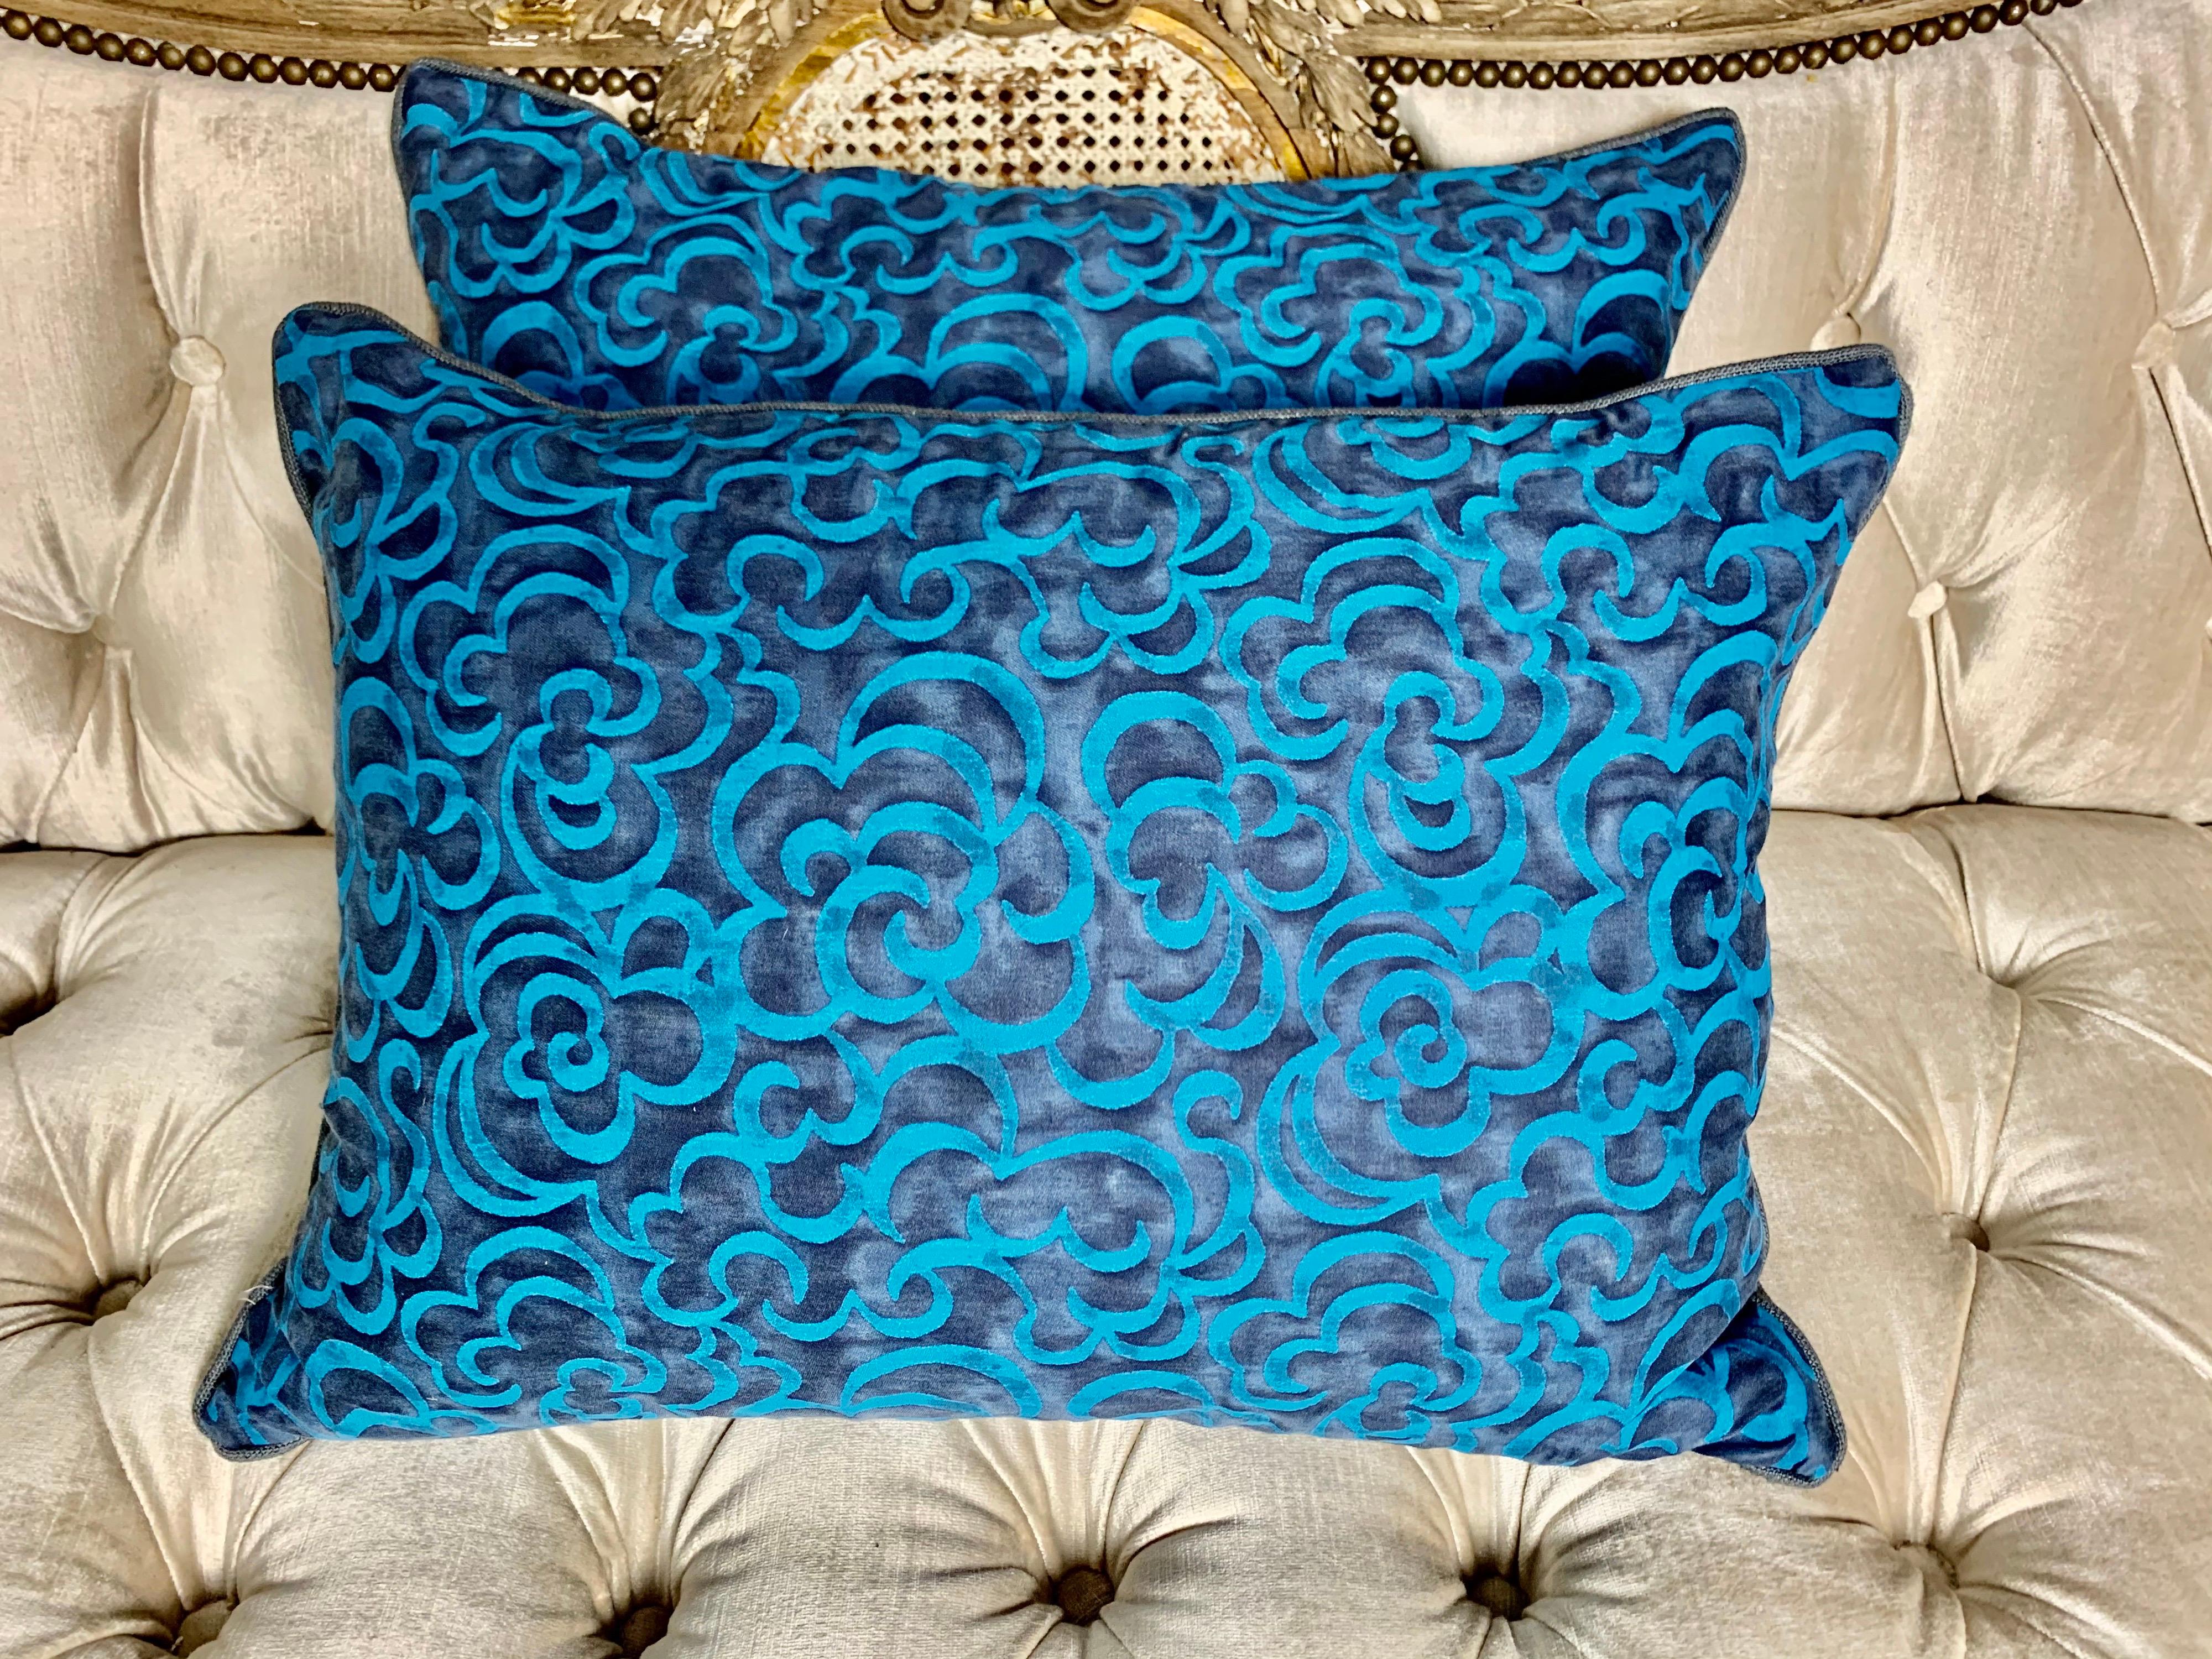 Pair of custom Fortuny Nuvole patterned pillows in Turkish blues. Nuvole Is the Italian word for clouds. The cotton Fortuny was printed in Italy as well. The backs are a coordinating linen. Self cording, down insert.